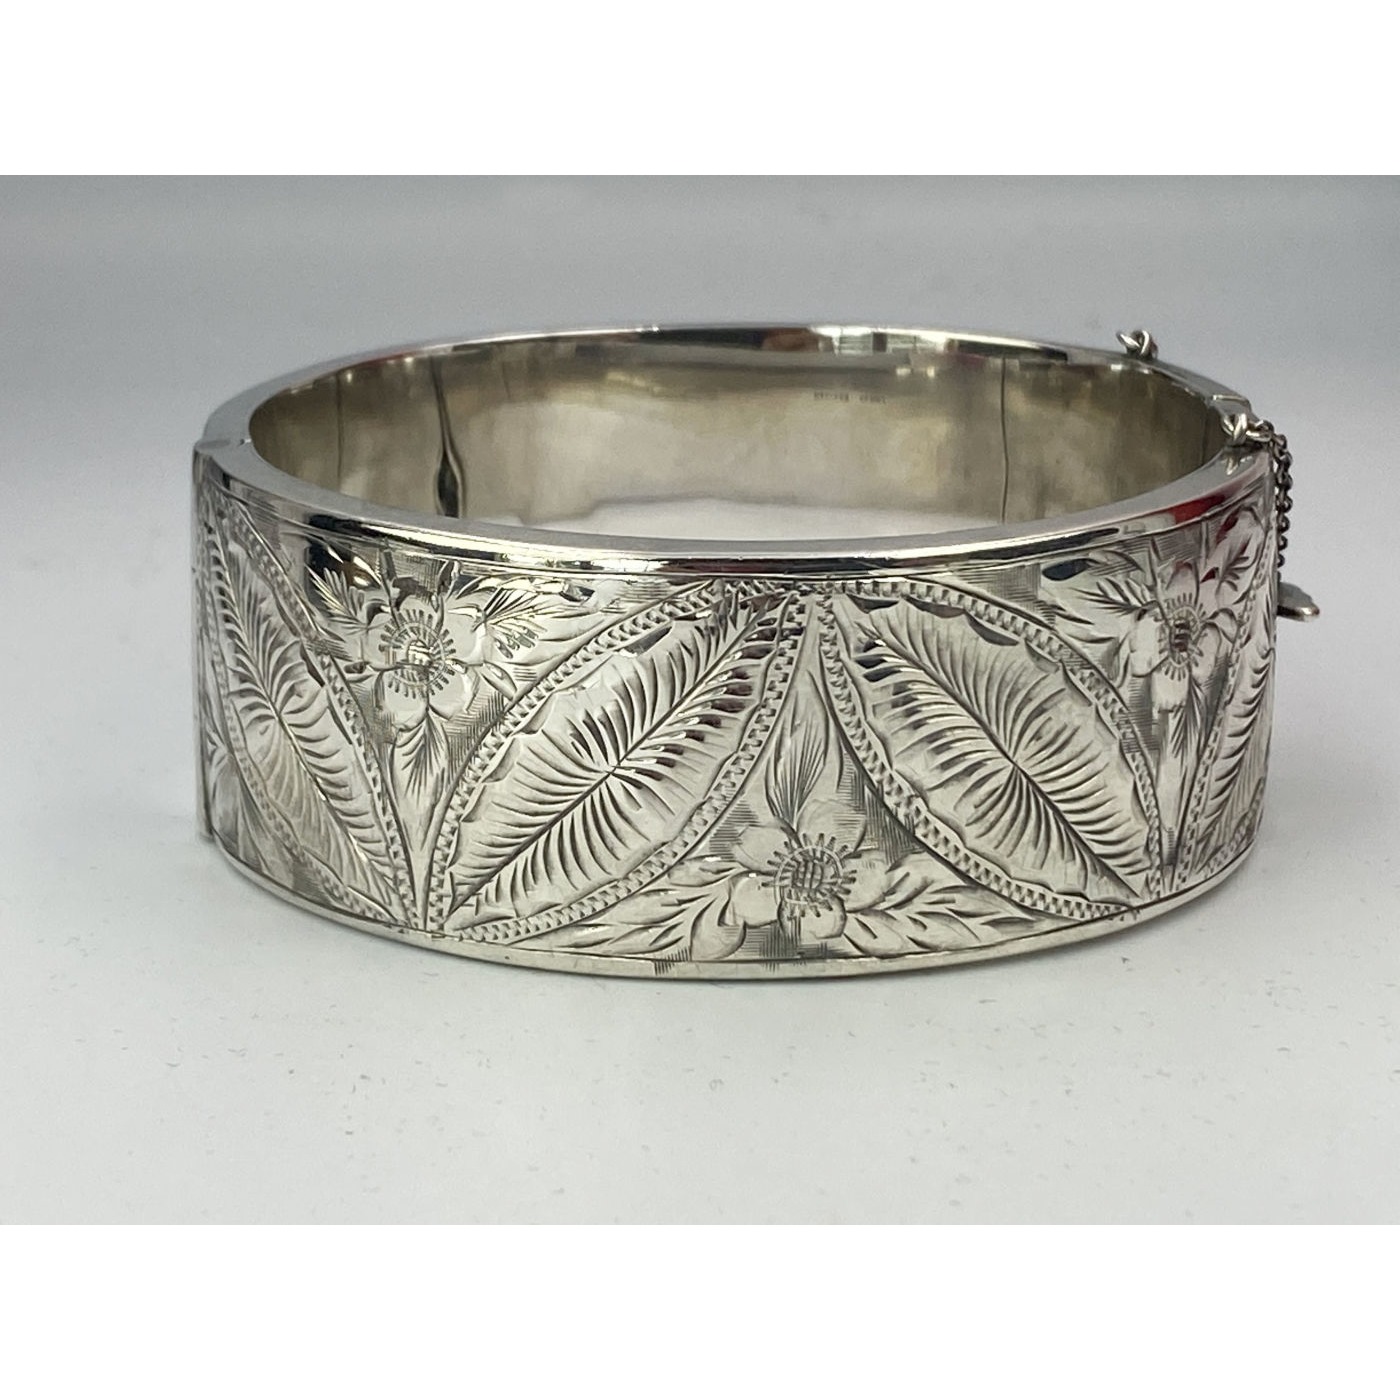 Intricate Detailed Melon-Shaped Leaves Antique English Silver Bangle